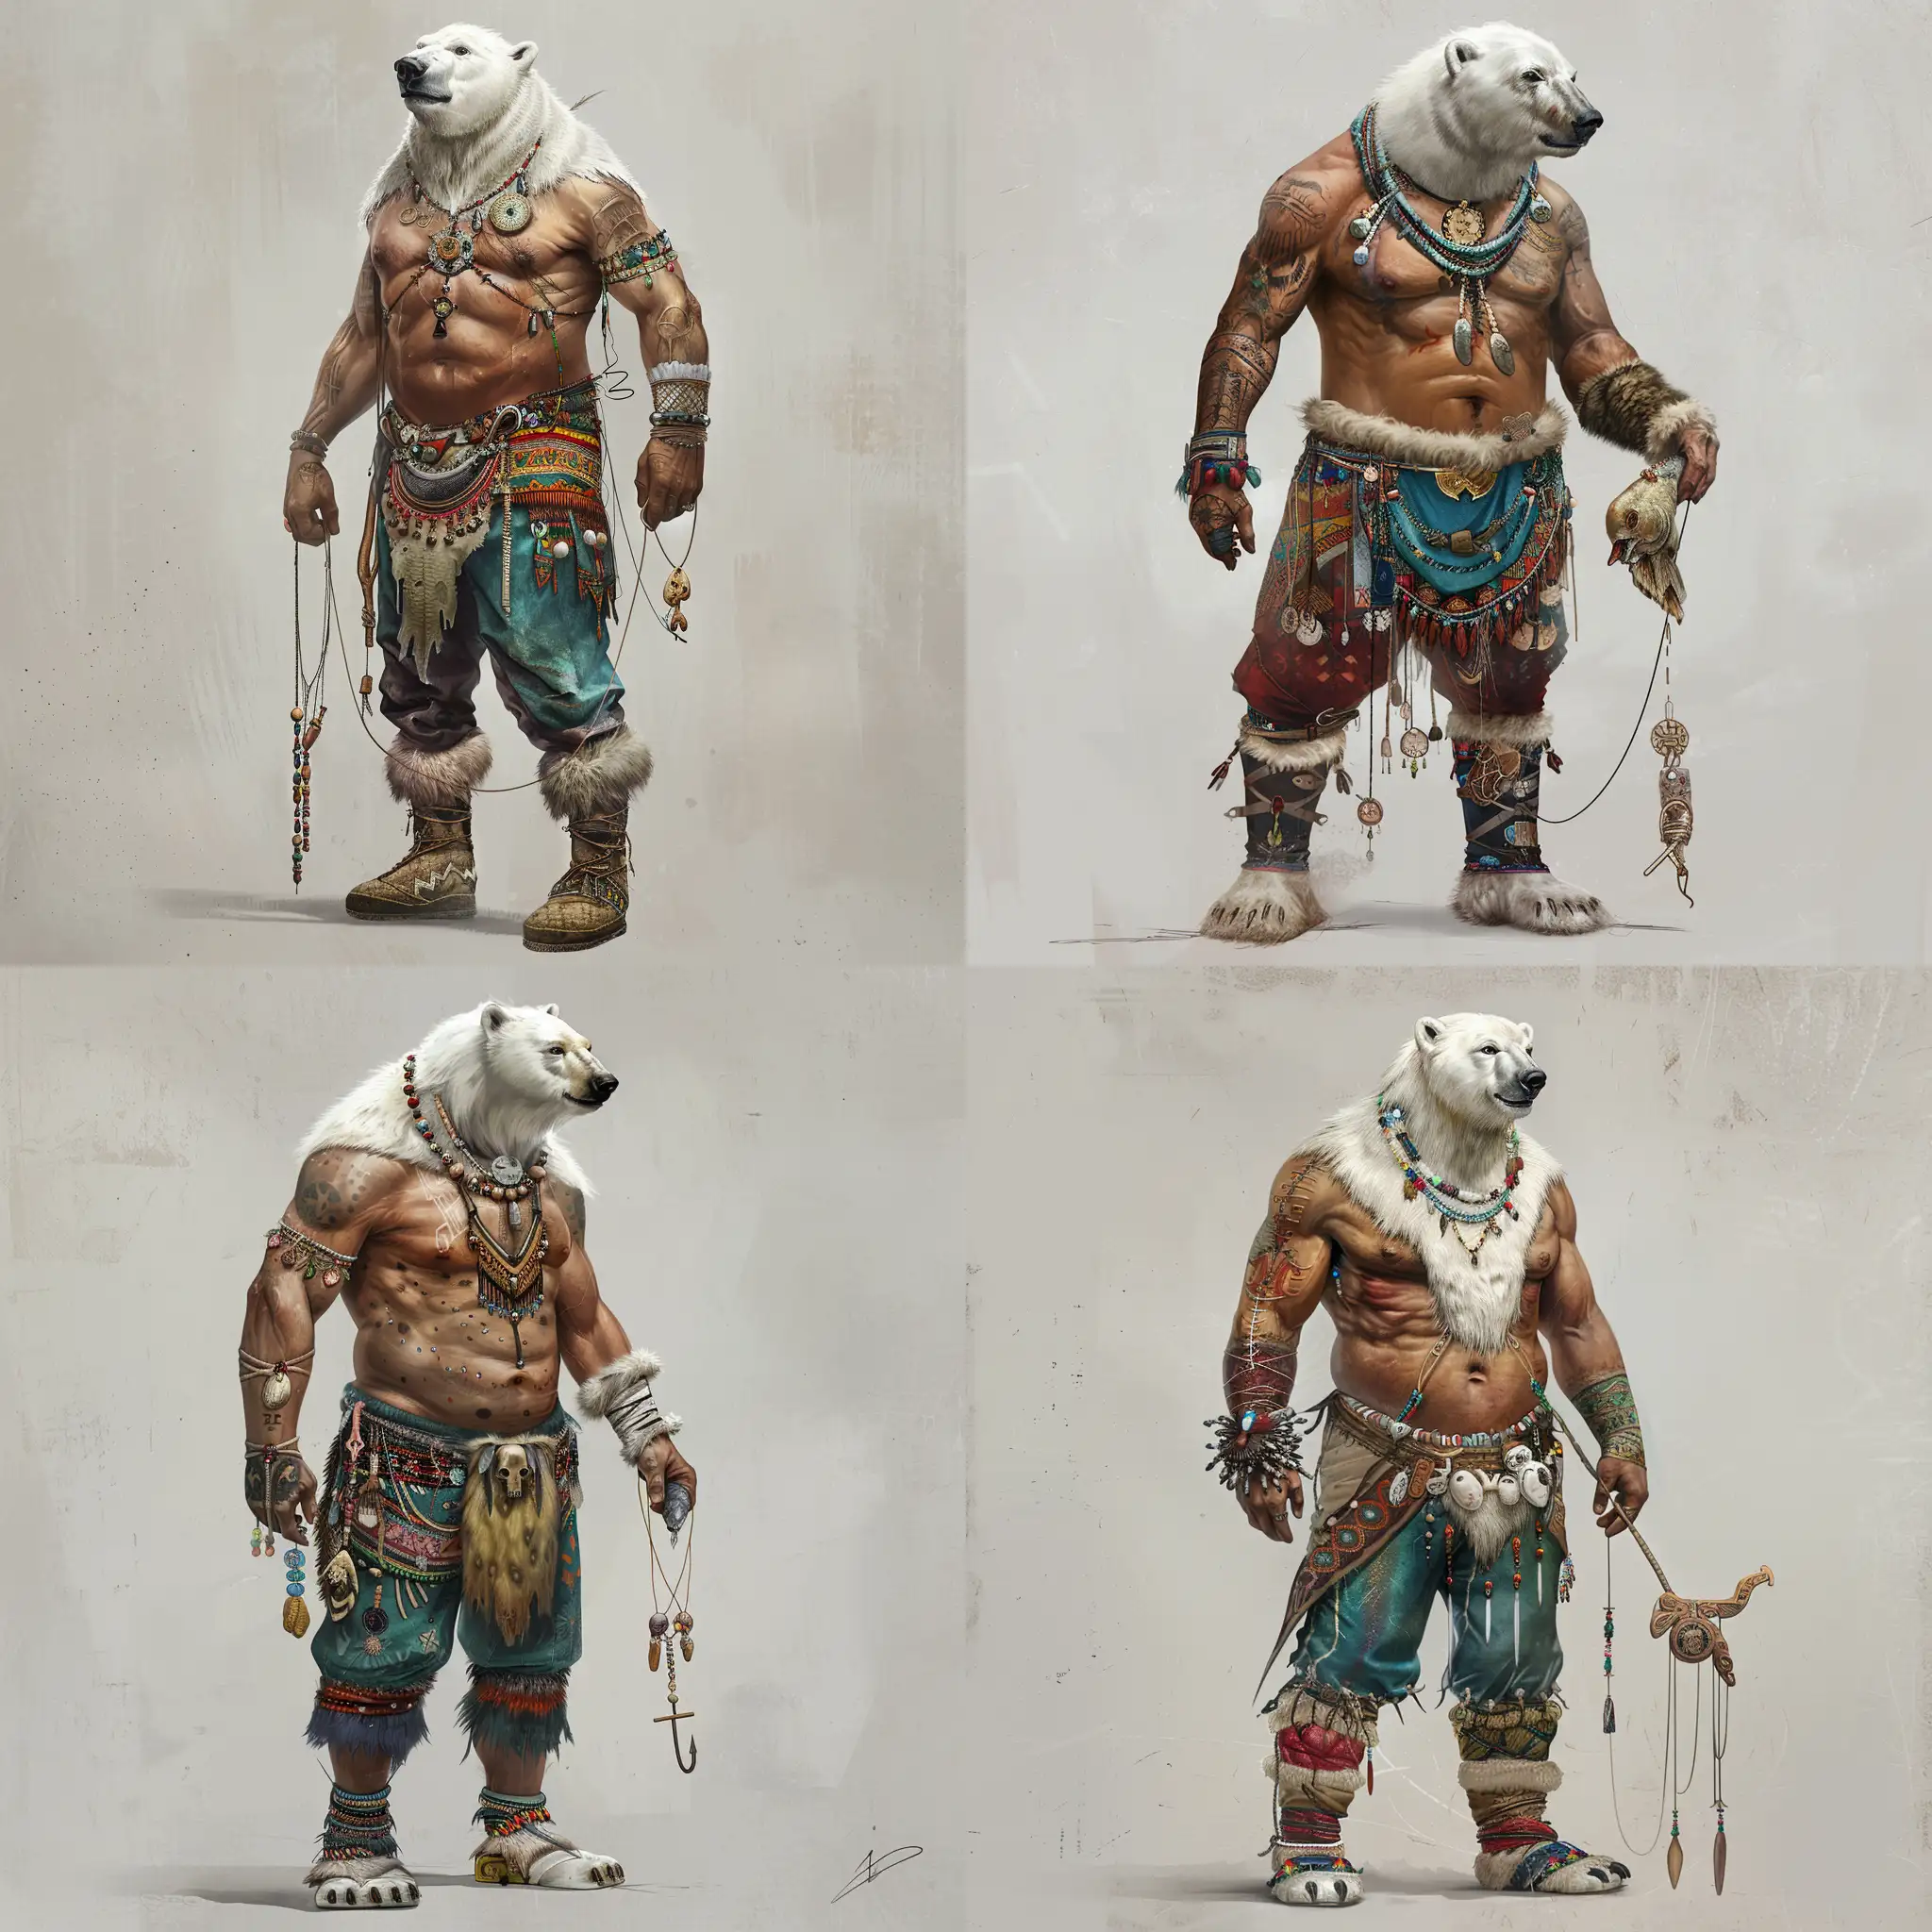 I need to generate an older, one-armed demigod. His head is that of a polar bear but a human body (no right arm). He is a lean but strong figure. He is an amputee missing his right arm. He wears traditional Inuit pants and boots with lots of traditional details and charms, with a shaman aesthetic. He carries a string with a hand-carved fish-hook on it. There is an intensity and a confidence in his posture. Concept art style.